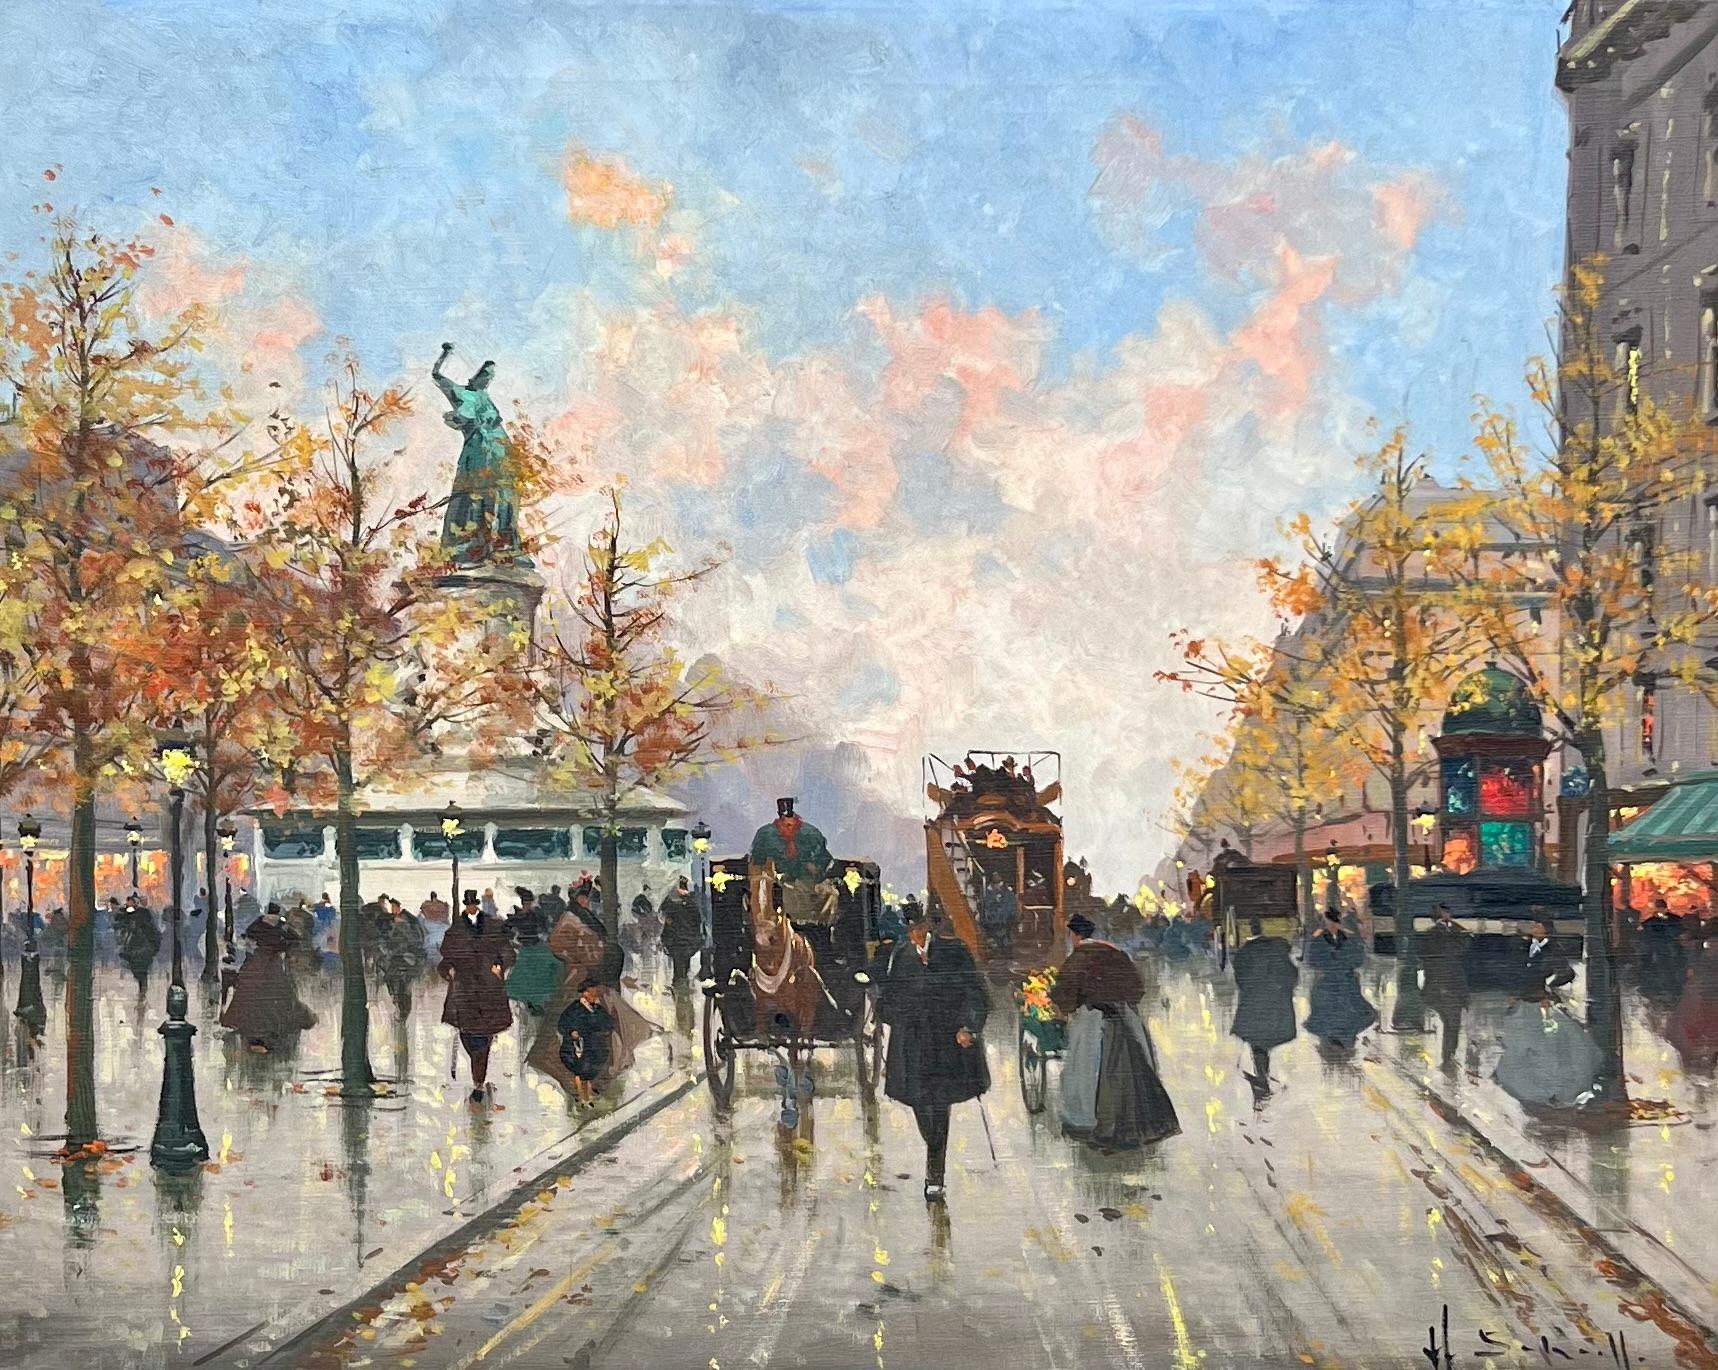 Oil on canvas, signed in the lower right featuring a vibrant street in Paris.

Henri Alexis Schaeffer (1900-1975) was born in Paris, France in early August of 1900. A student at the Ecole Nationale des Beaux Arts in Paris, Schaeffer studied